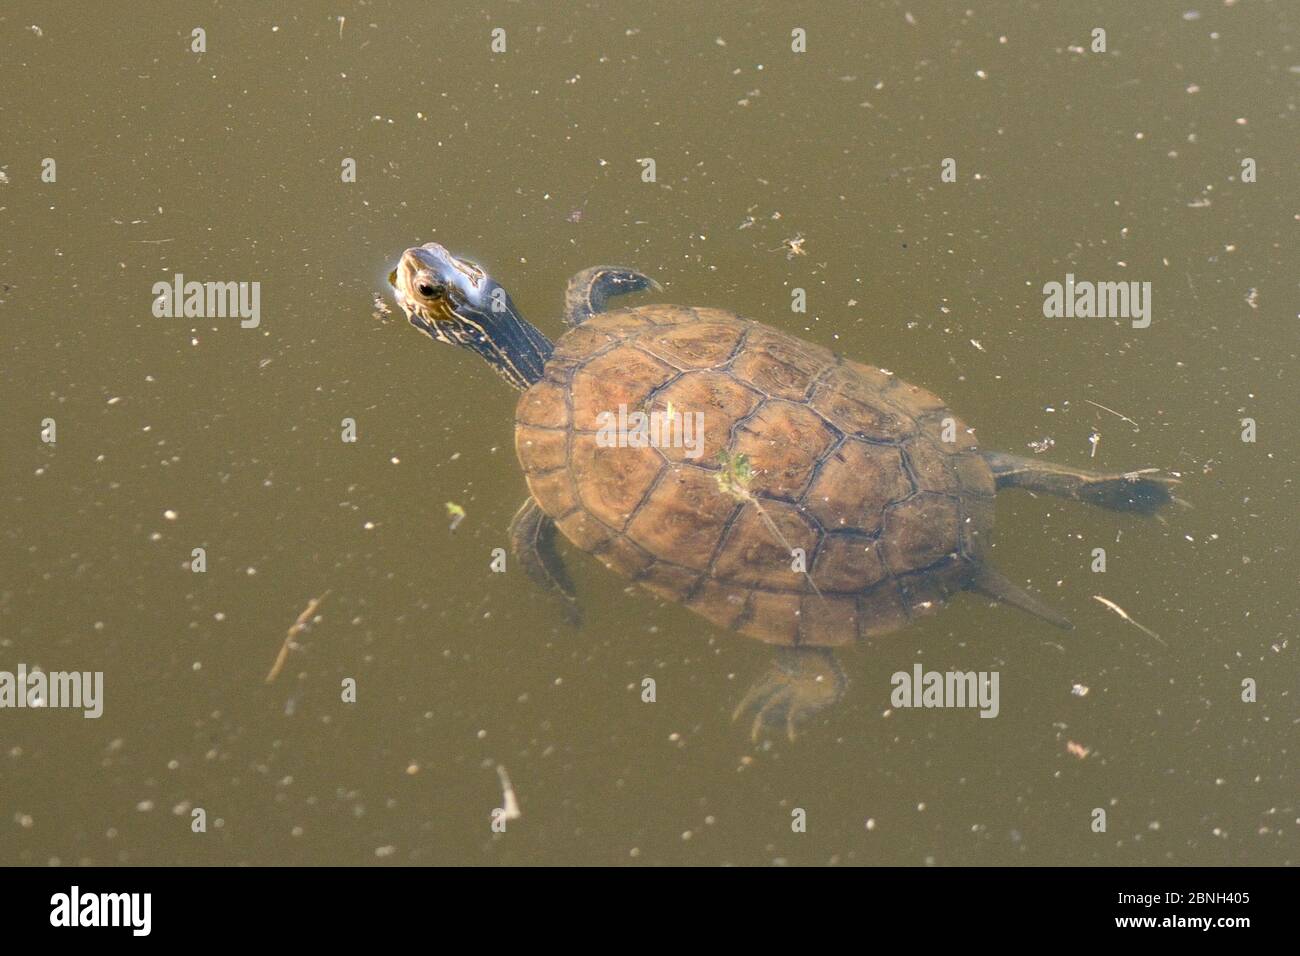 Young Western Caspian pond turtle / Balkan stripe-necked terrapin (Mauremys caspica rivulata) swimming in a pond with its head above water, Isle of Le Stock Photo